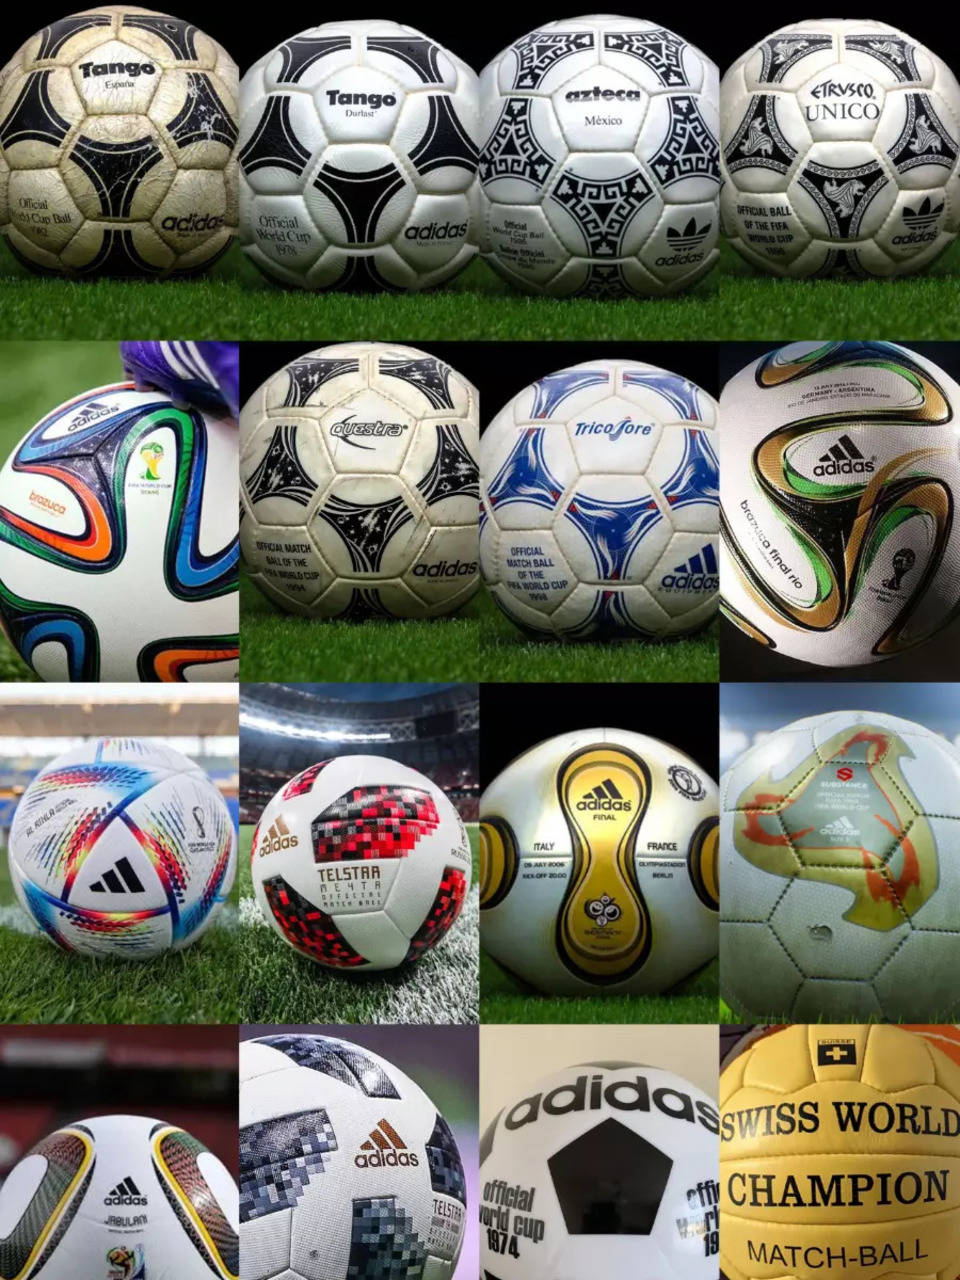 Brazuca Adidas Match Ball Best Quality 2014 FIFA World Cup Soccer Ball Size  5